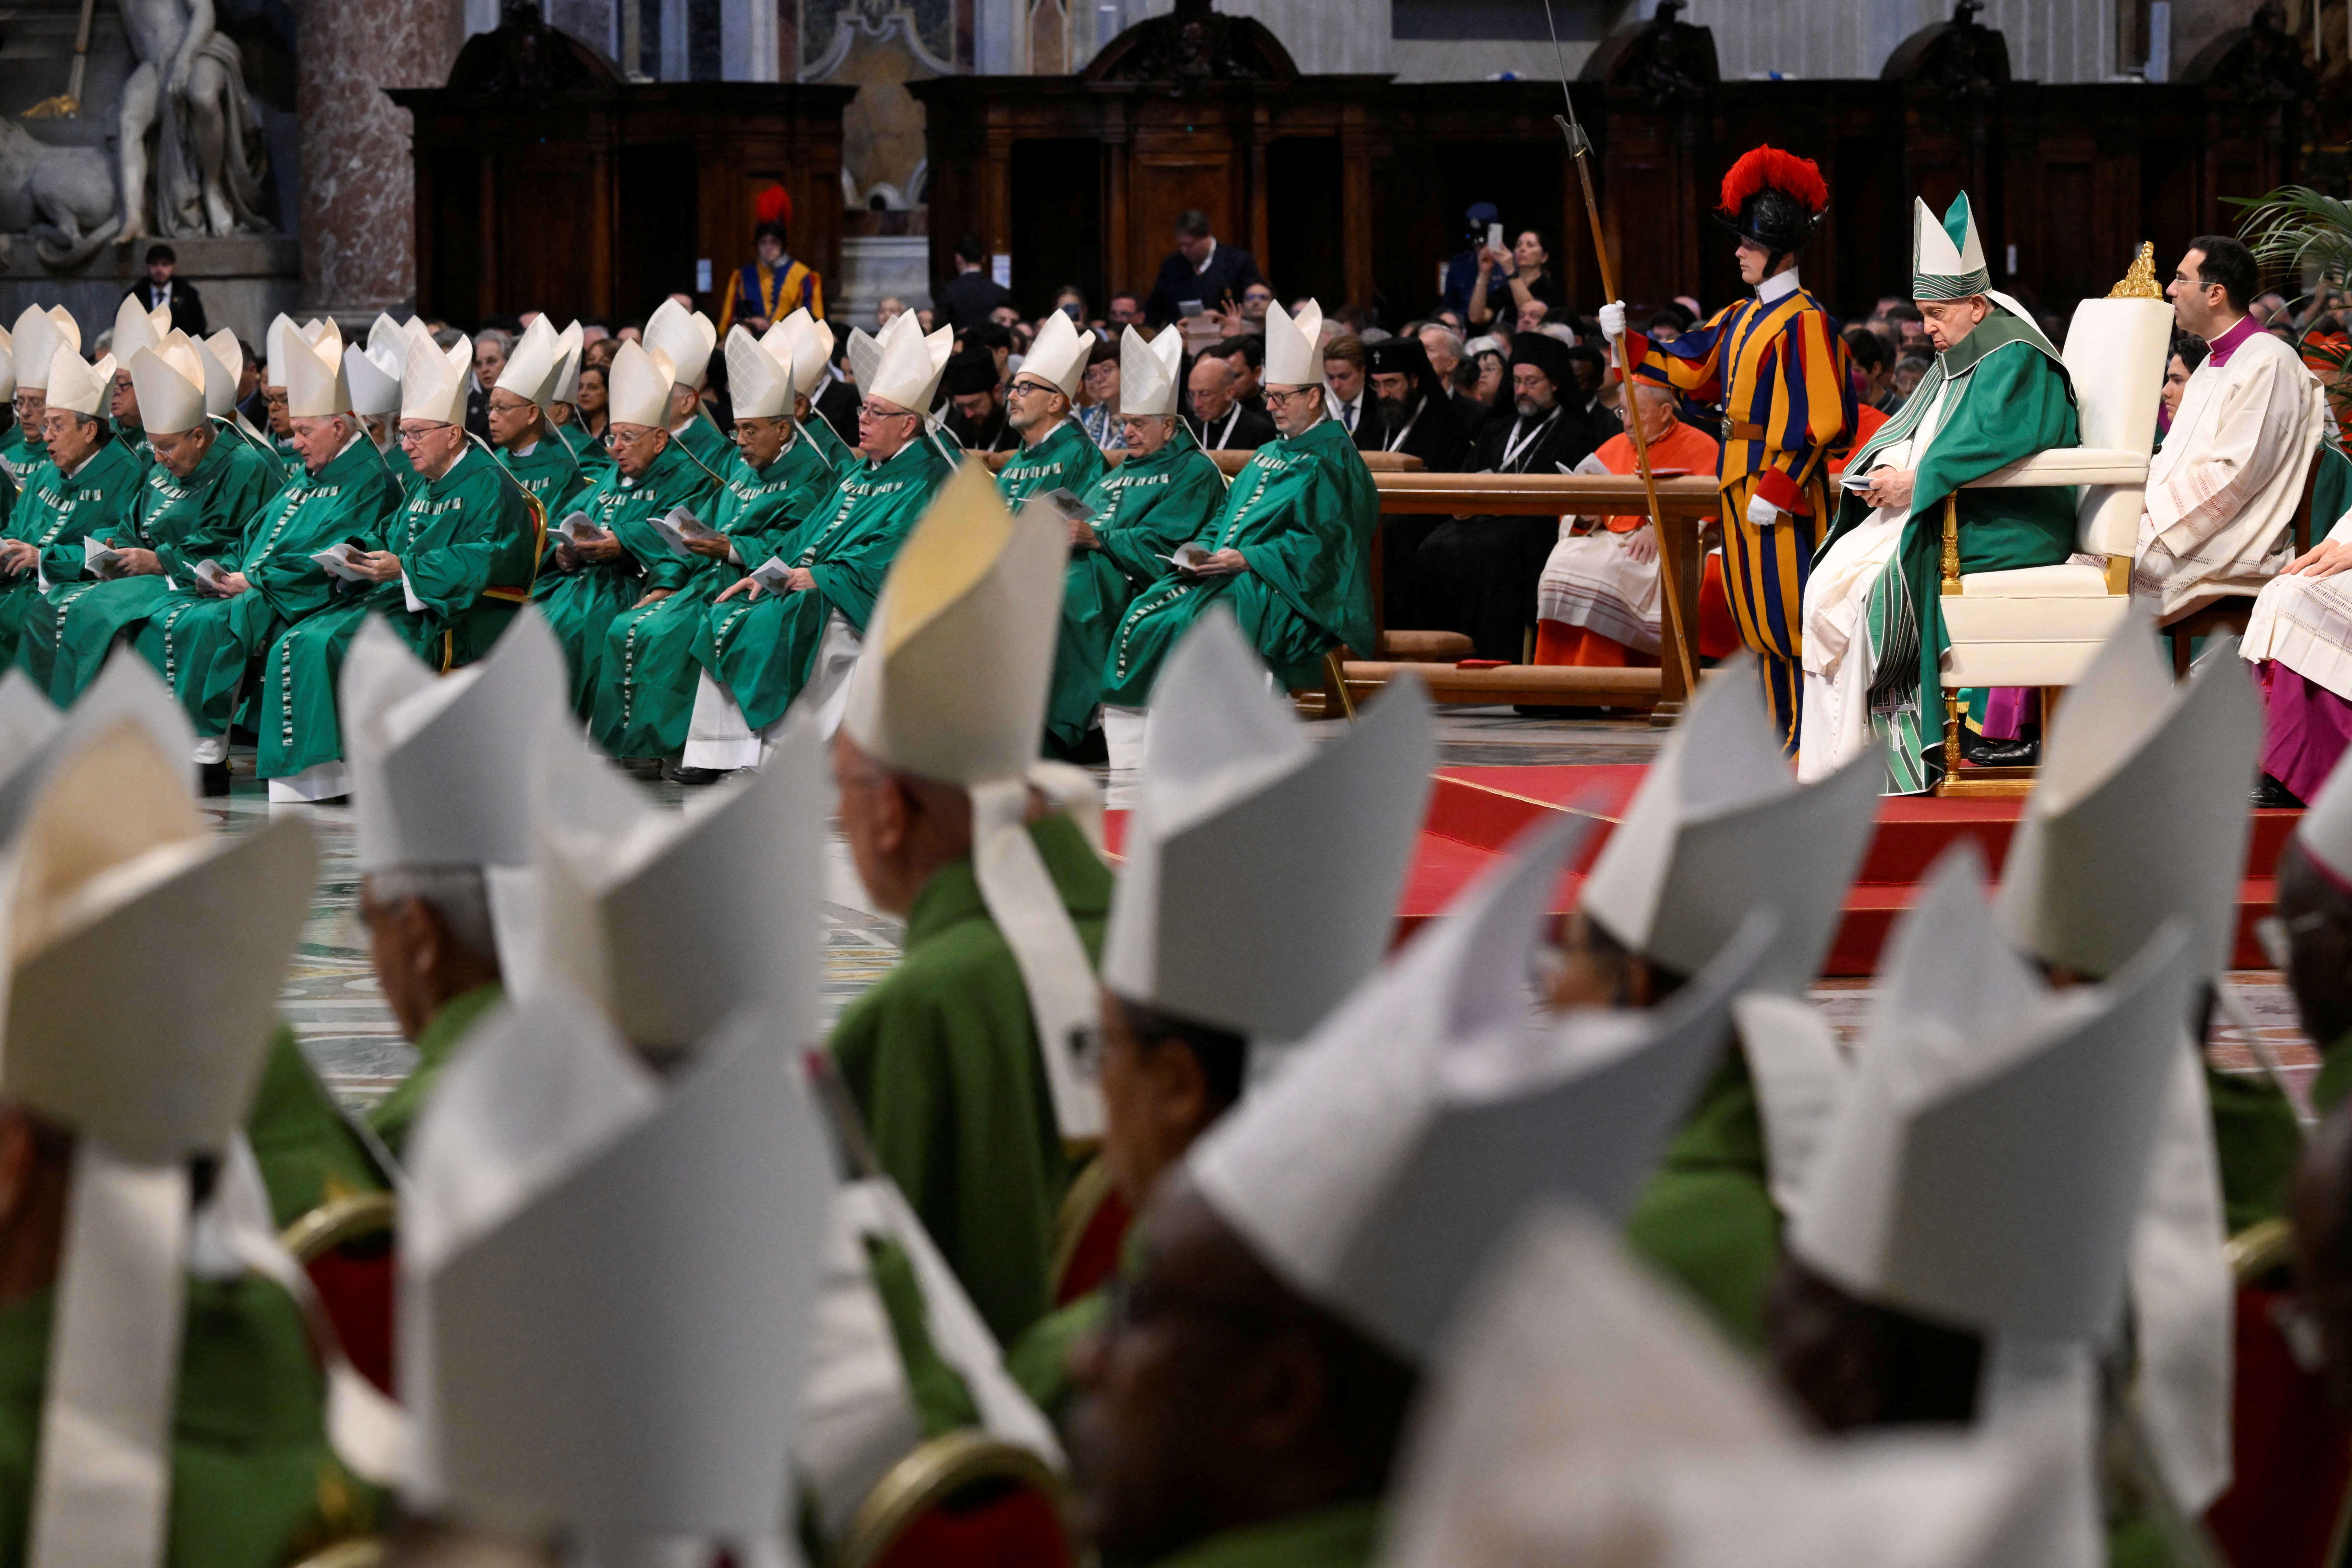 Synod of Bishops at the Vatican